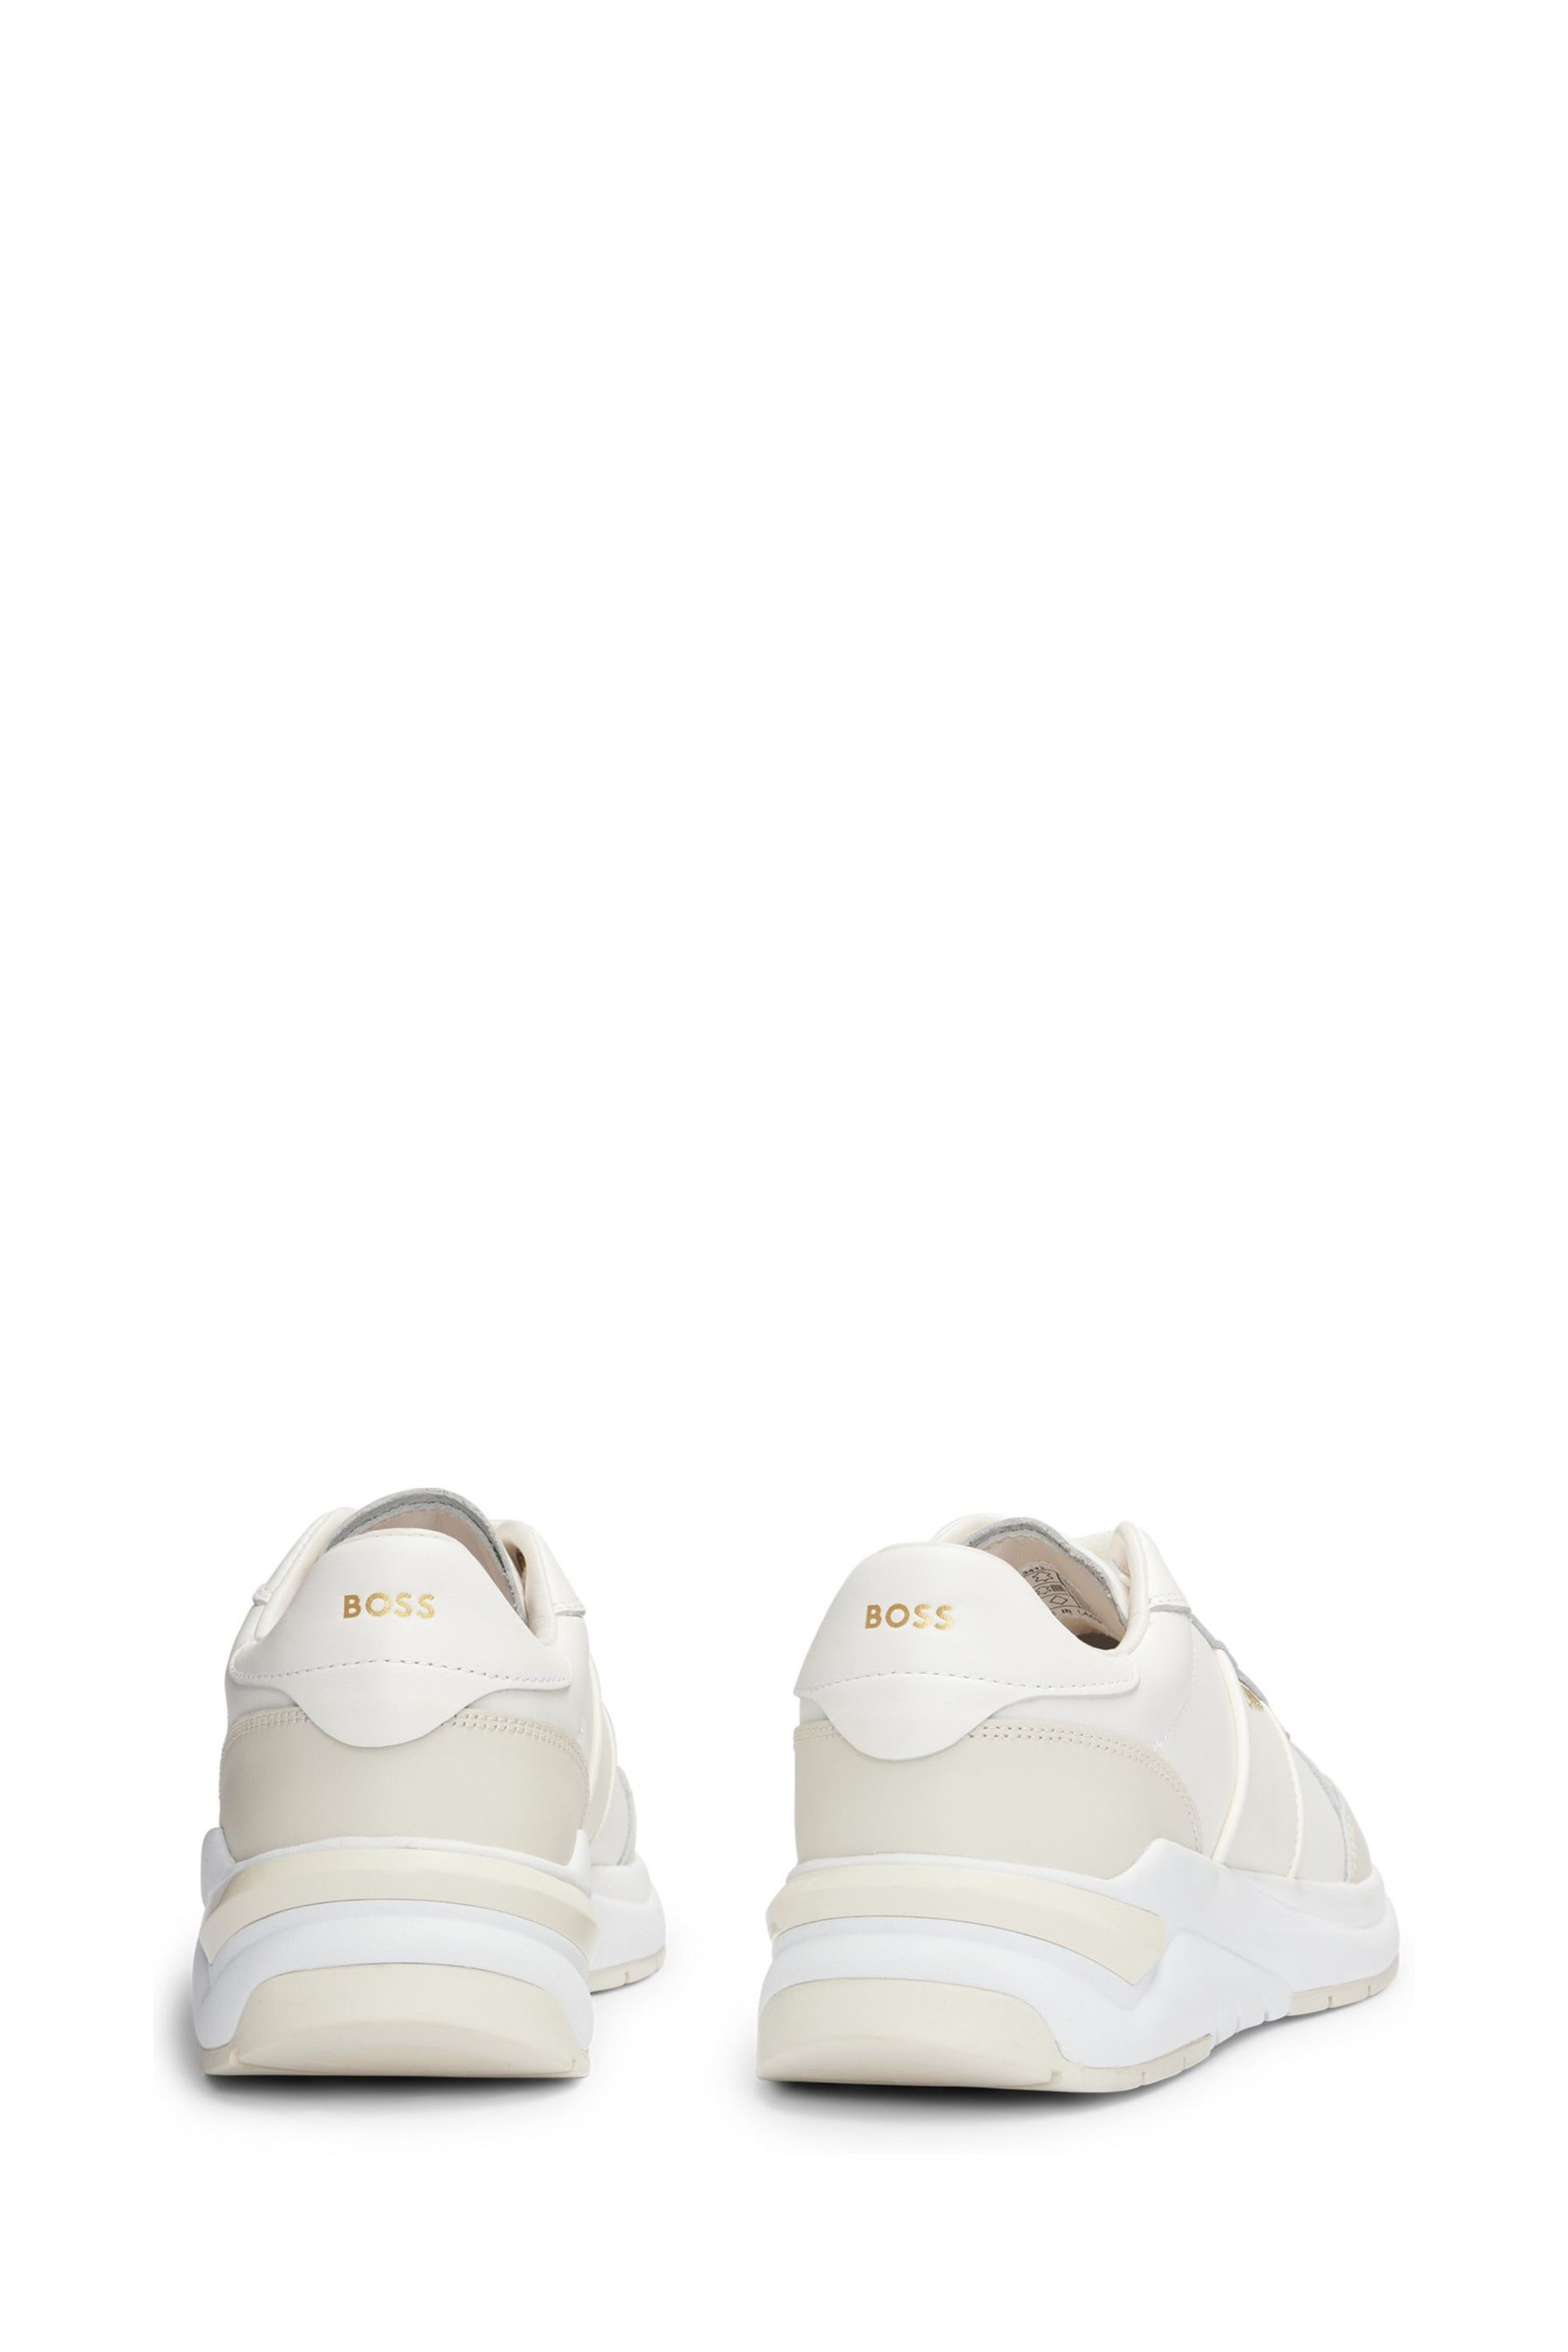 BOSS Cream Chunky Leather Trainers - Image 3 of 3